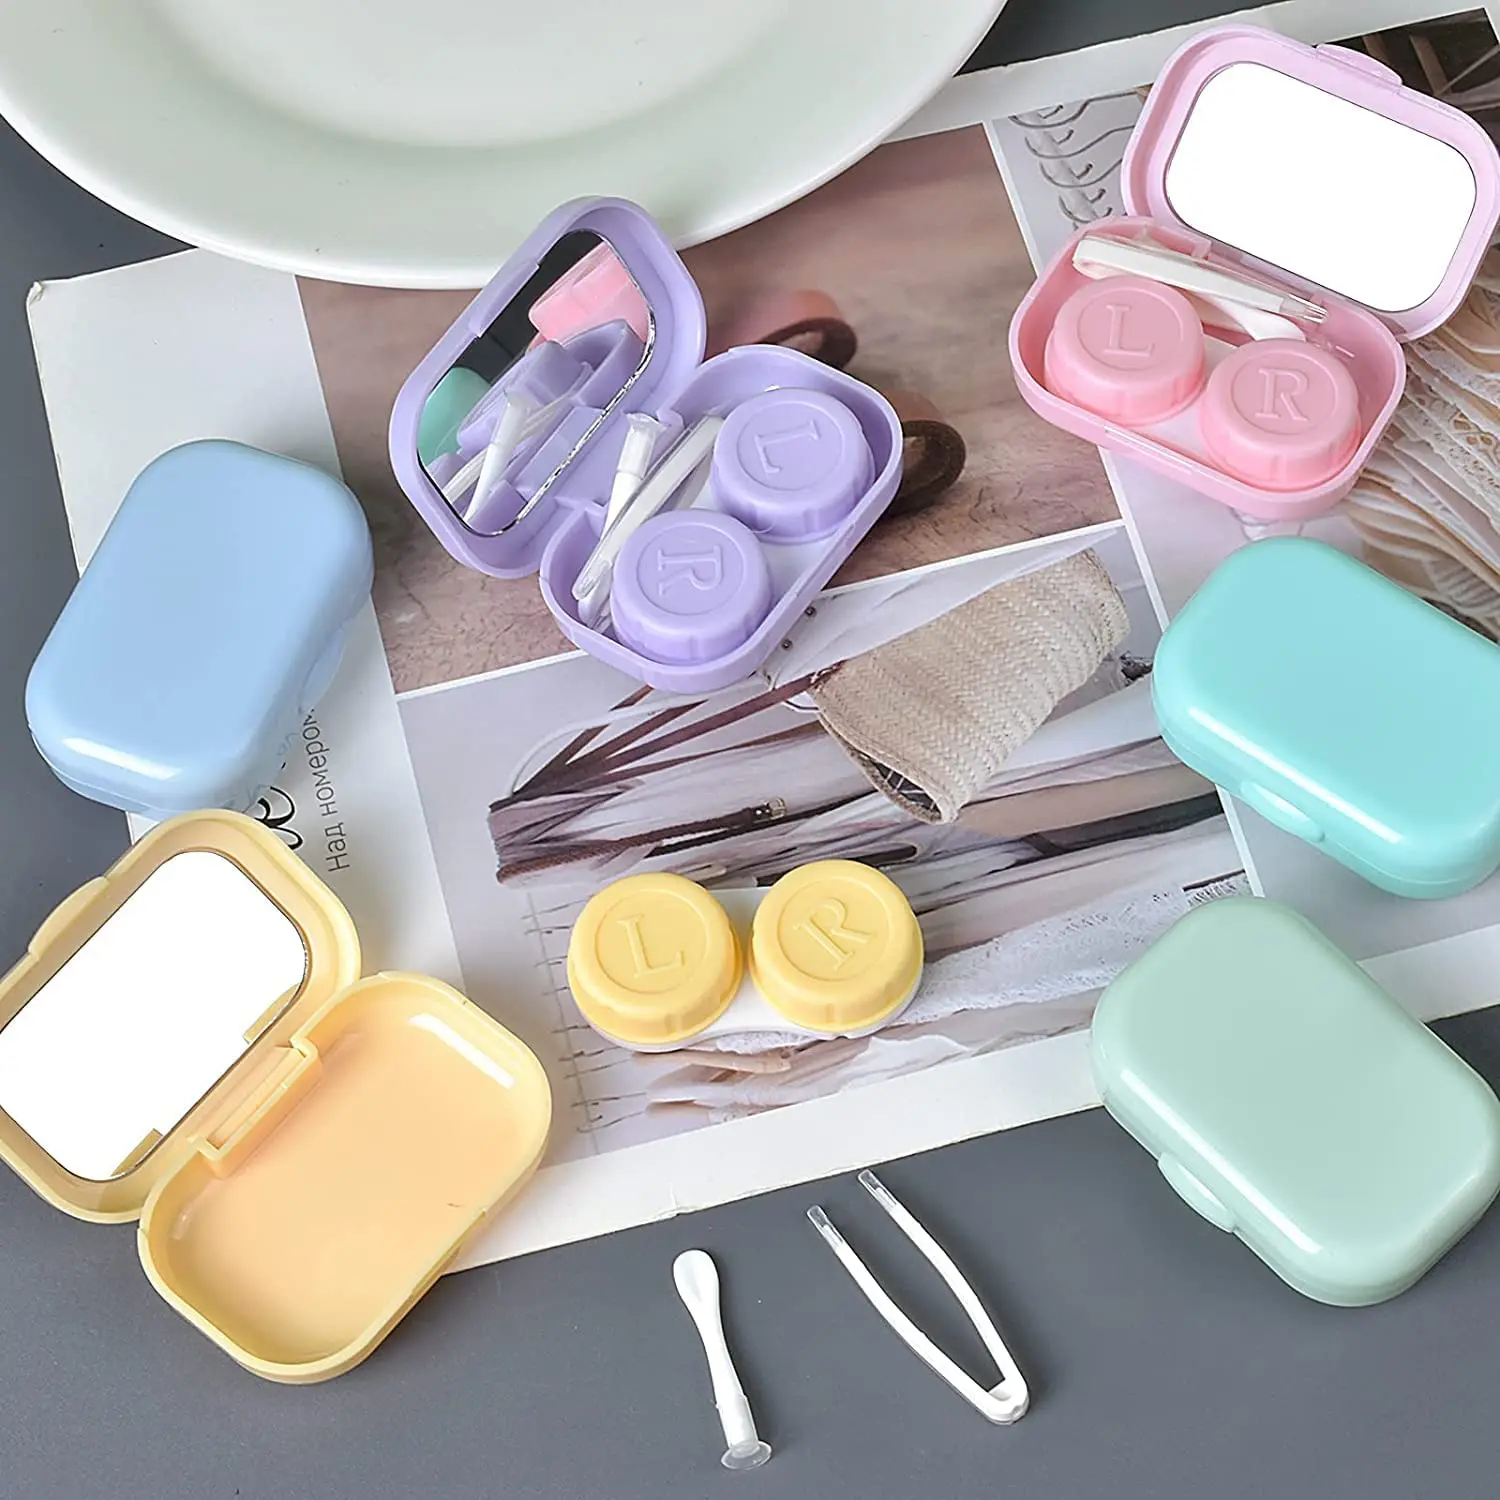 

1 pcs Pocket Portable Mini Contact Lens Case Easy Carry Make up beauty pupil storage box Mirror Container Travel Kit Cute Style